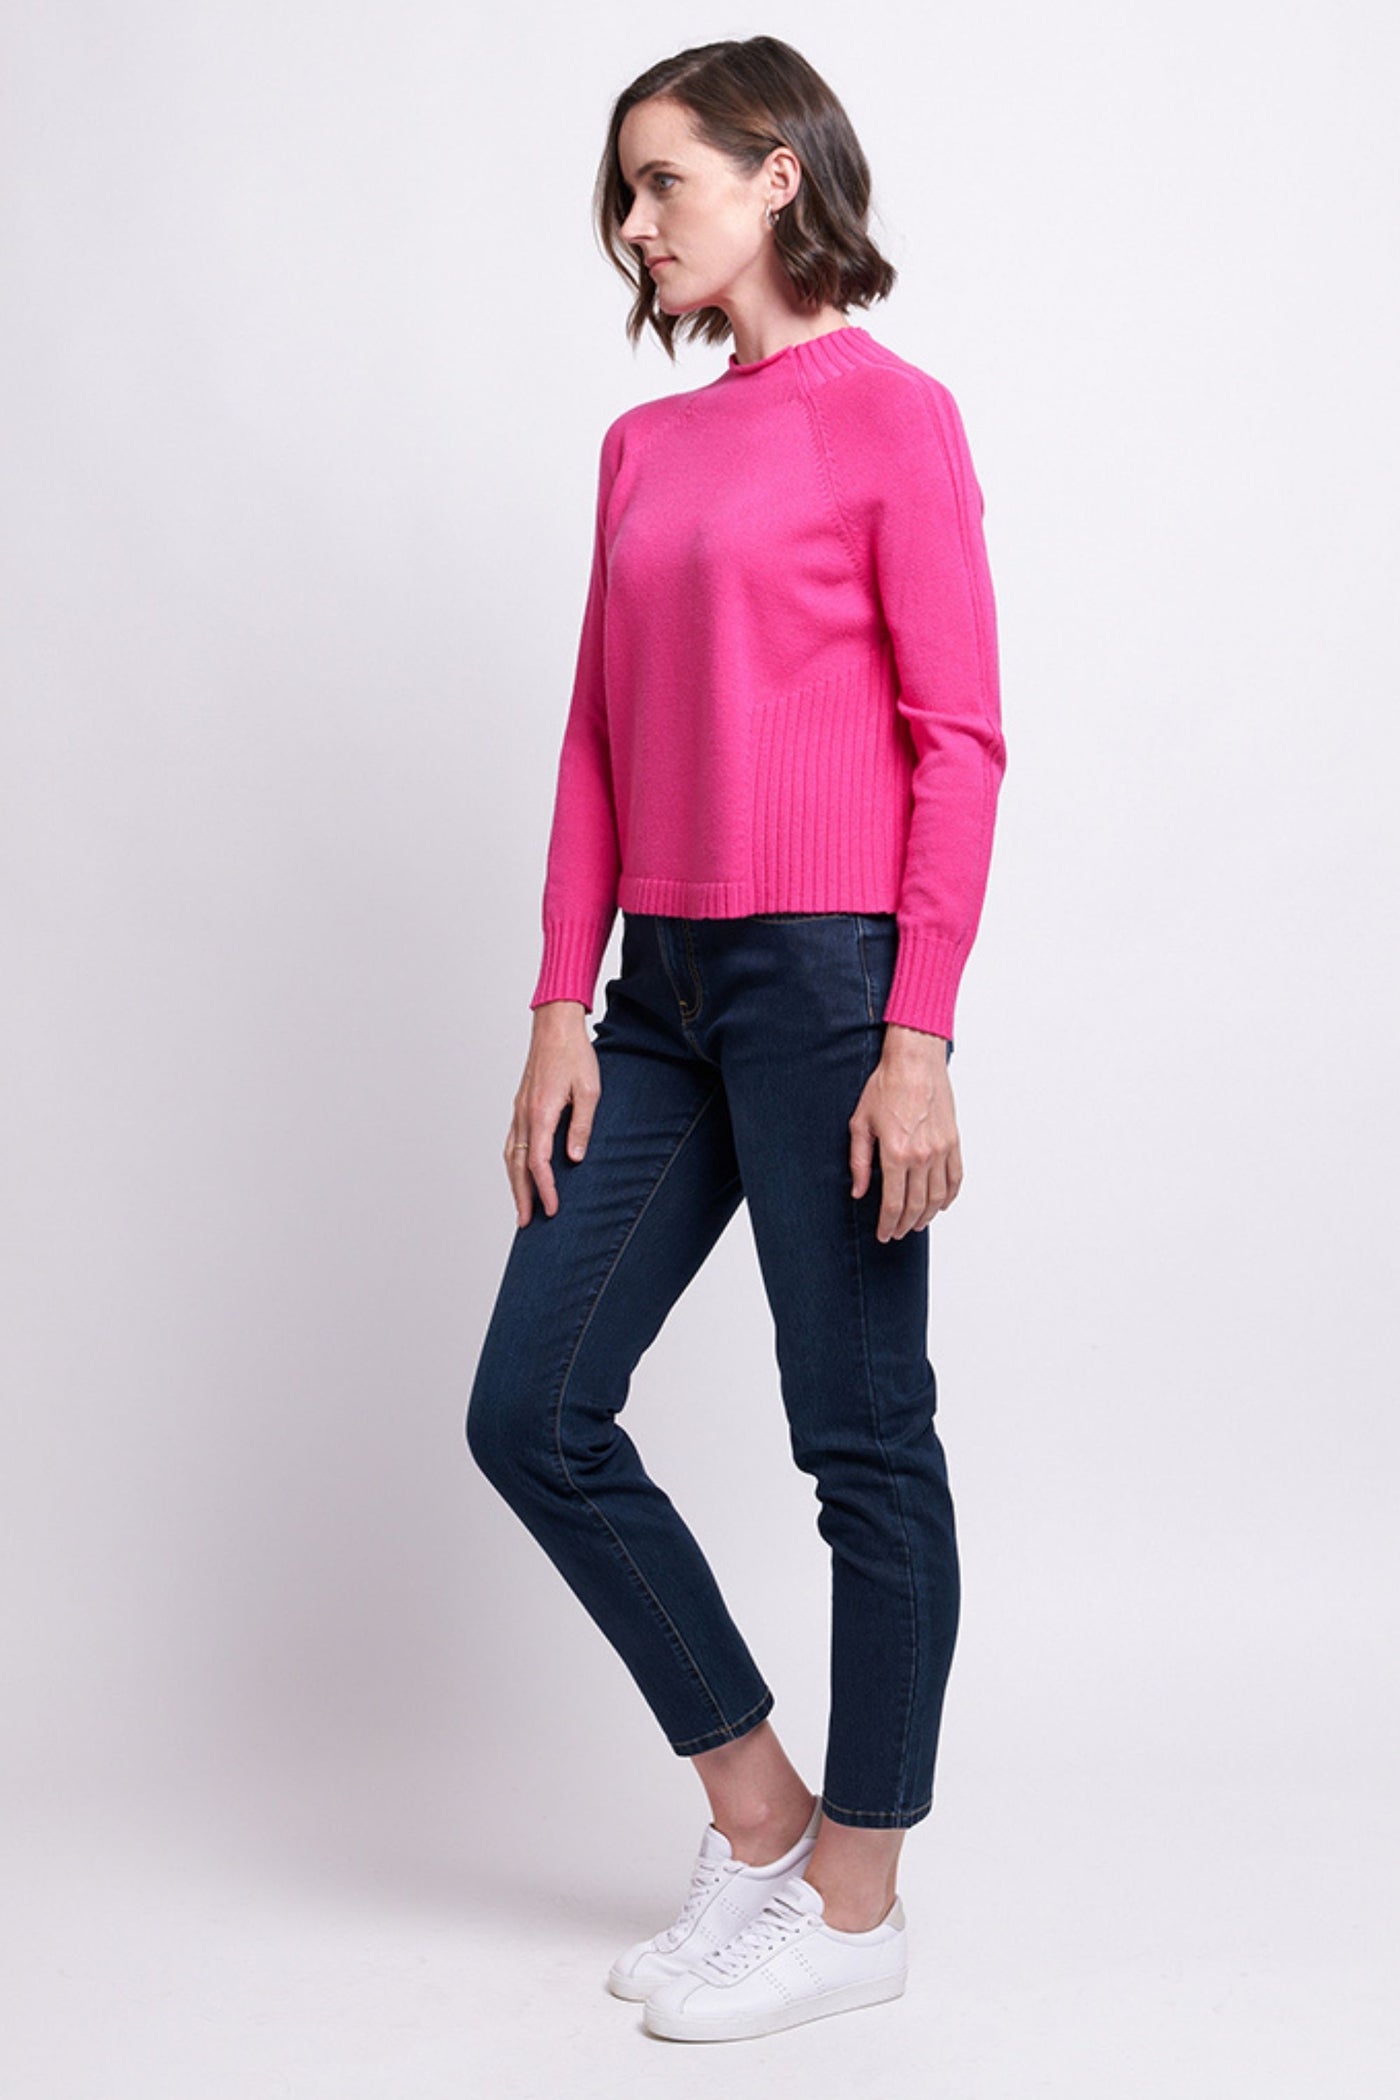 BE RIGHT SWEATER - FO7641